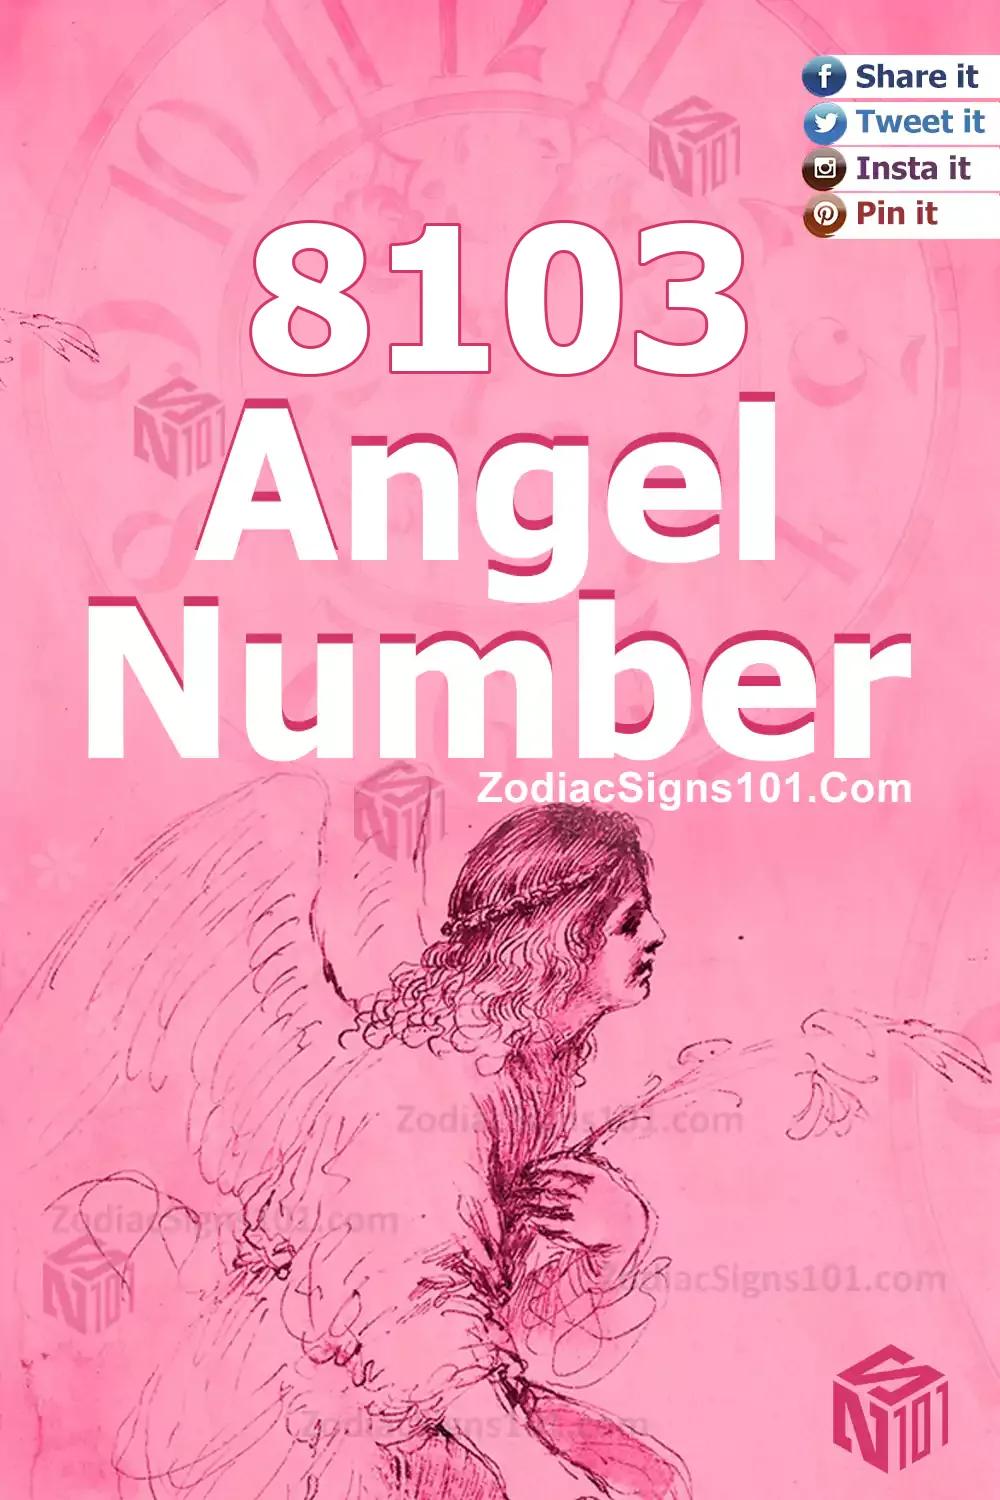 8103 Angel Number Meaning